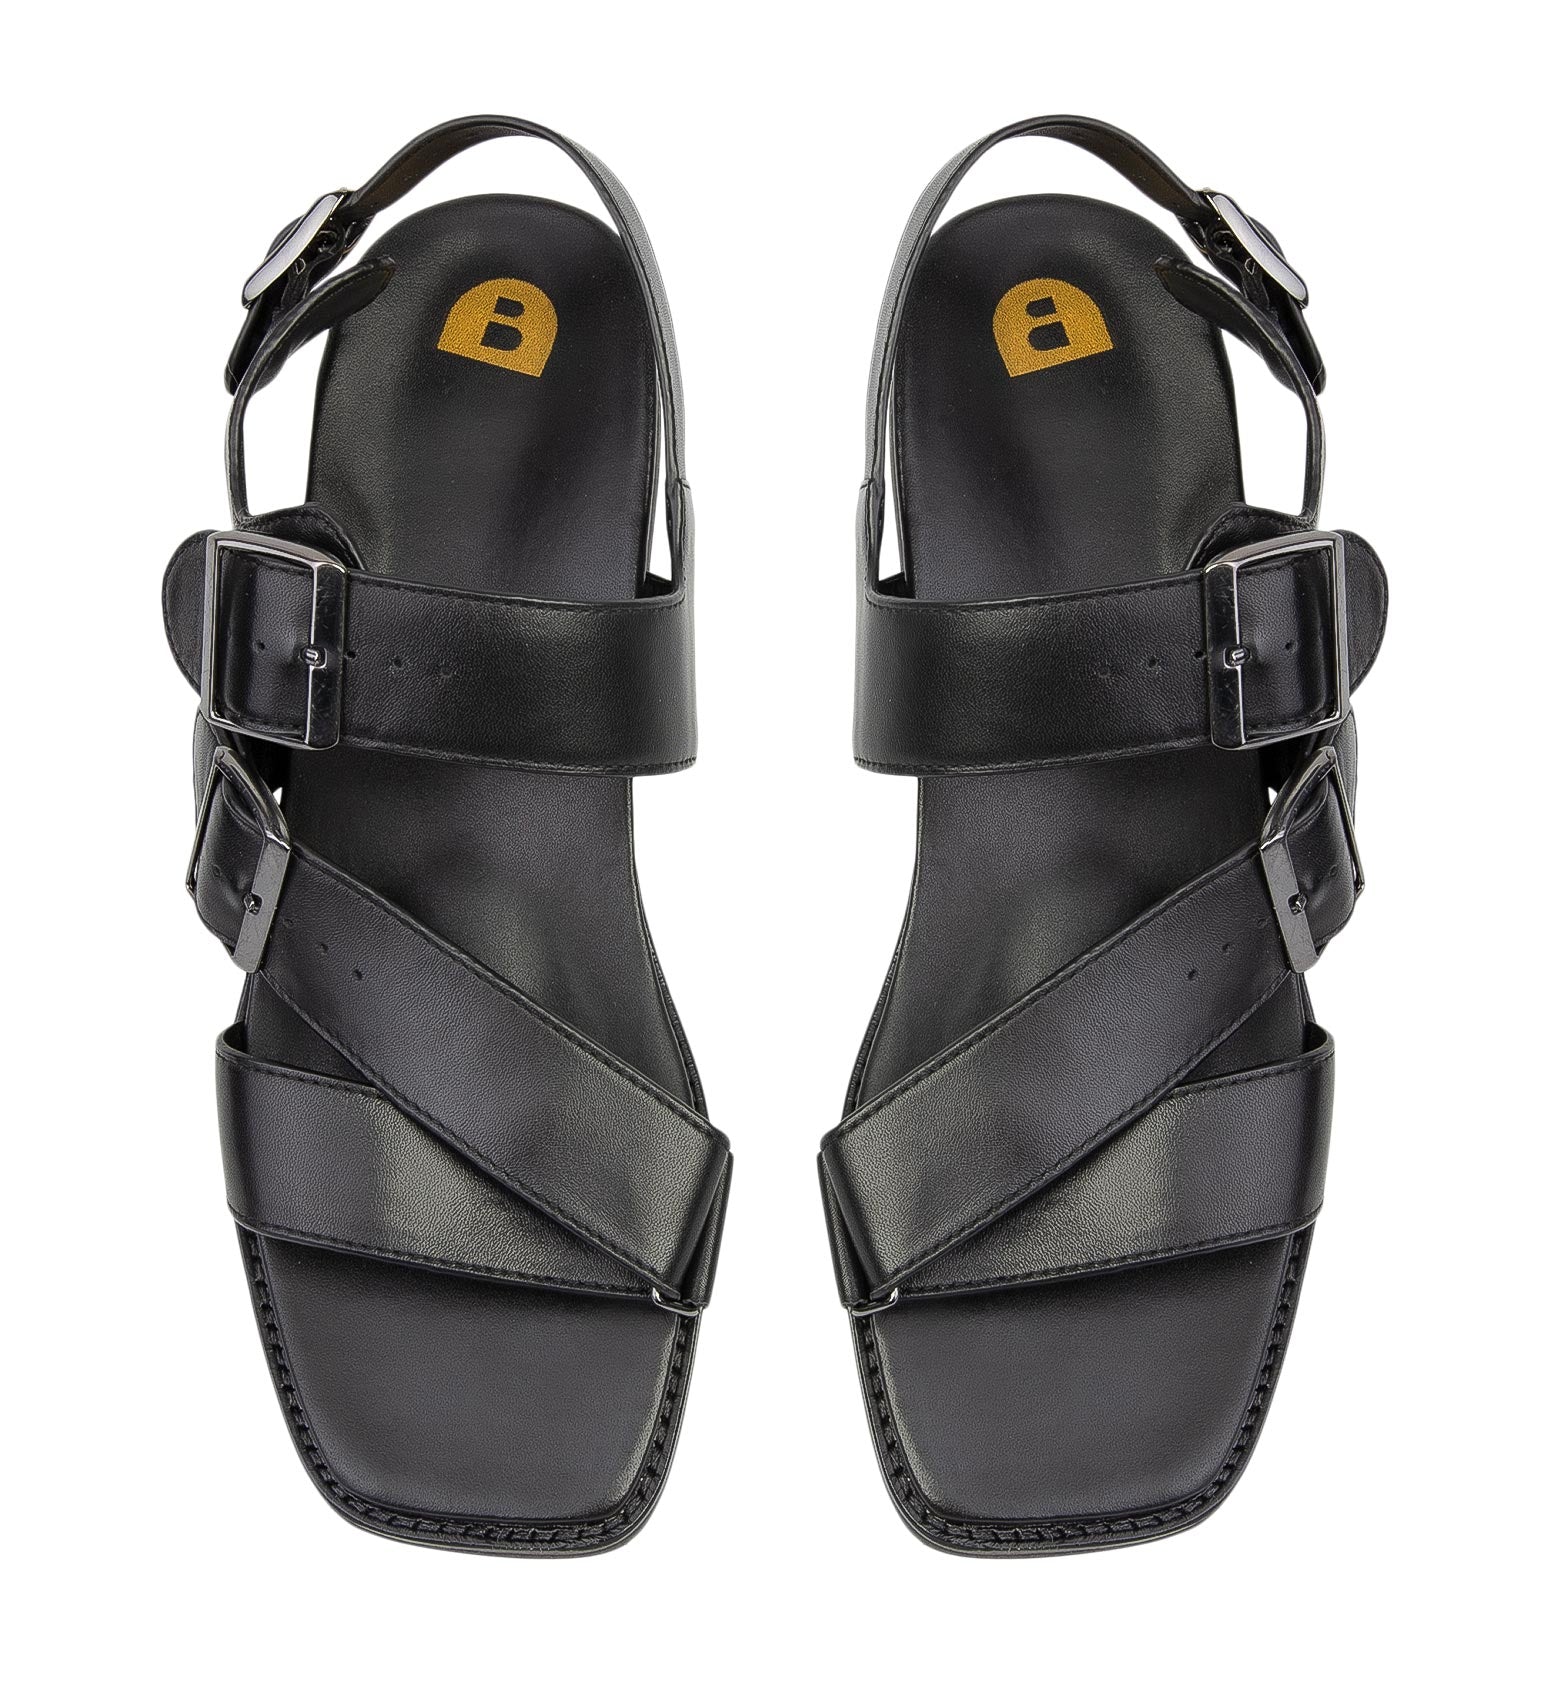 Hassium Black Leather Sandals | Bared Footwear